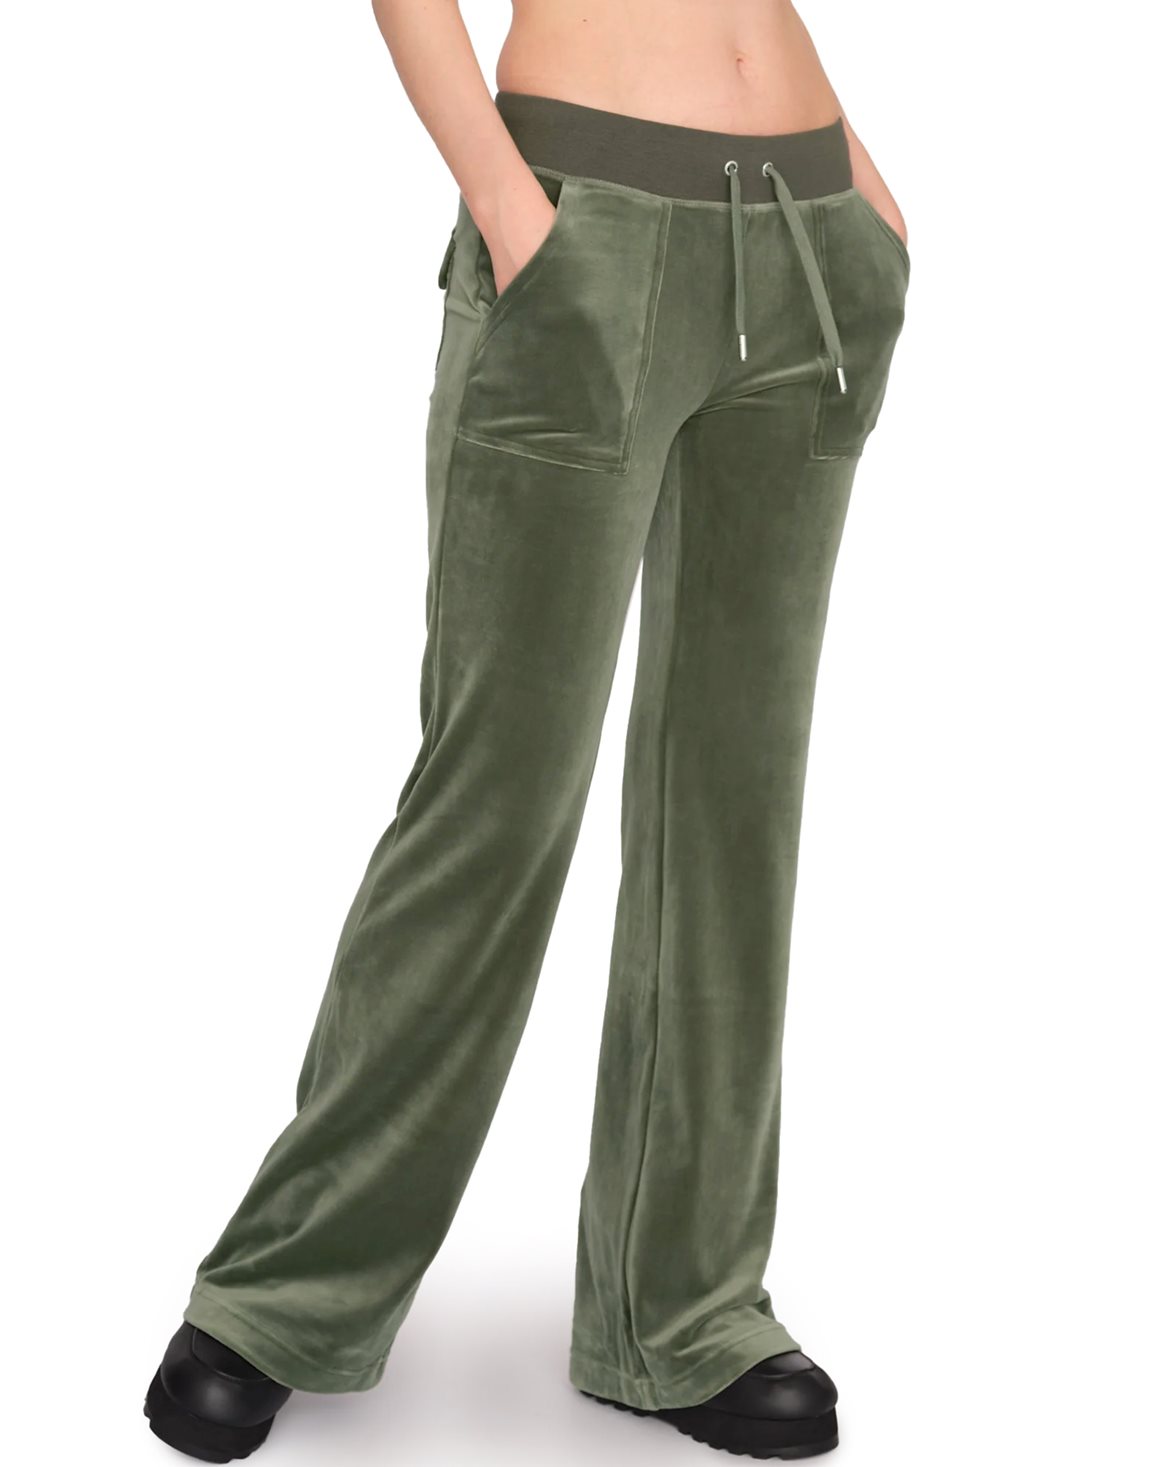 https://02.cdn37.se/ak1/images/2.800894/juicy-couture-layla-low-rise-flare-pants-thyme.jpeg